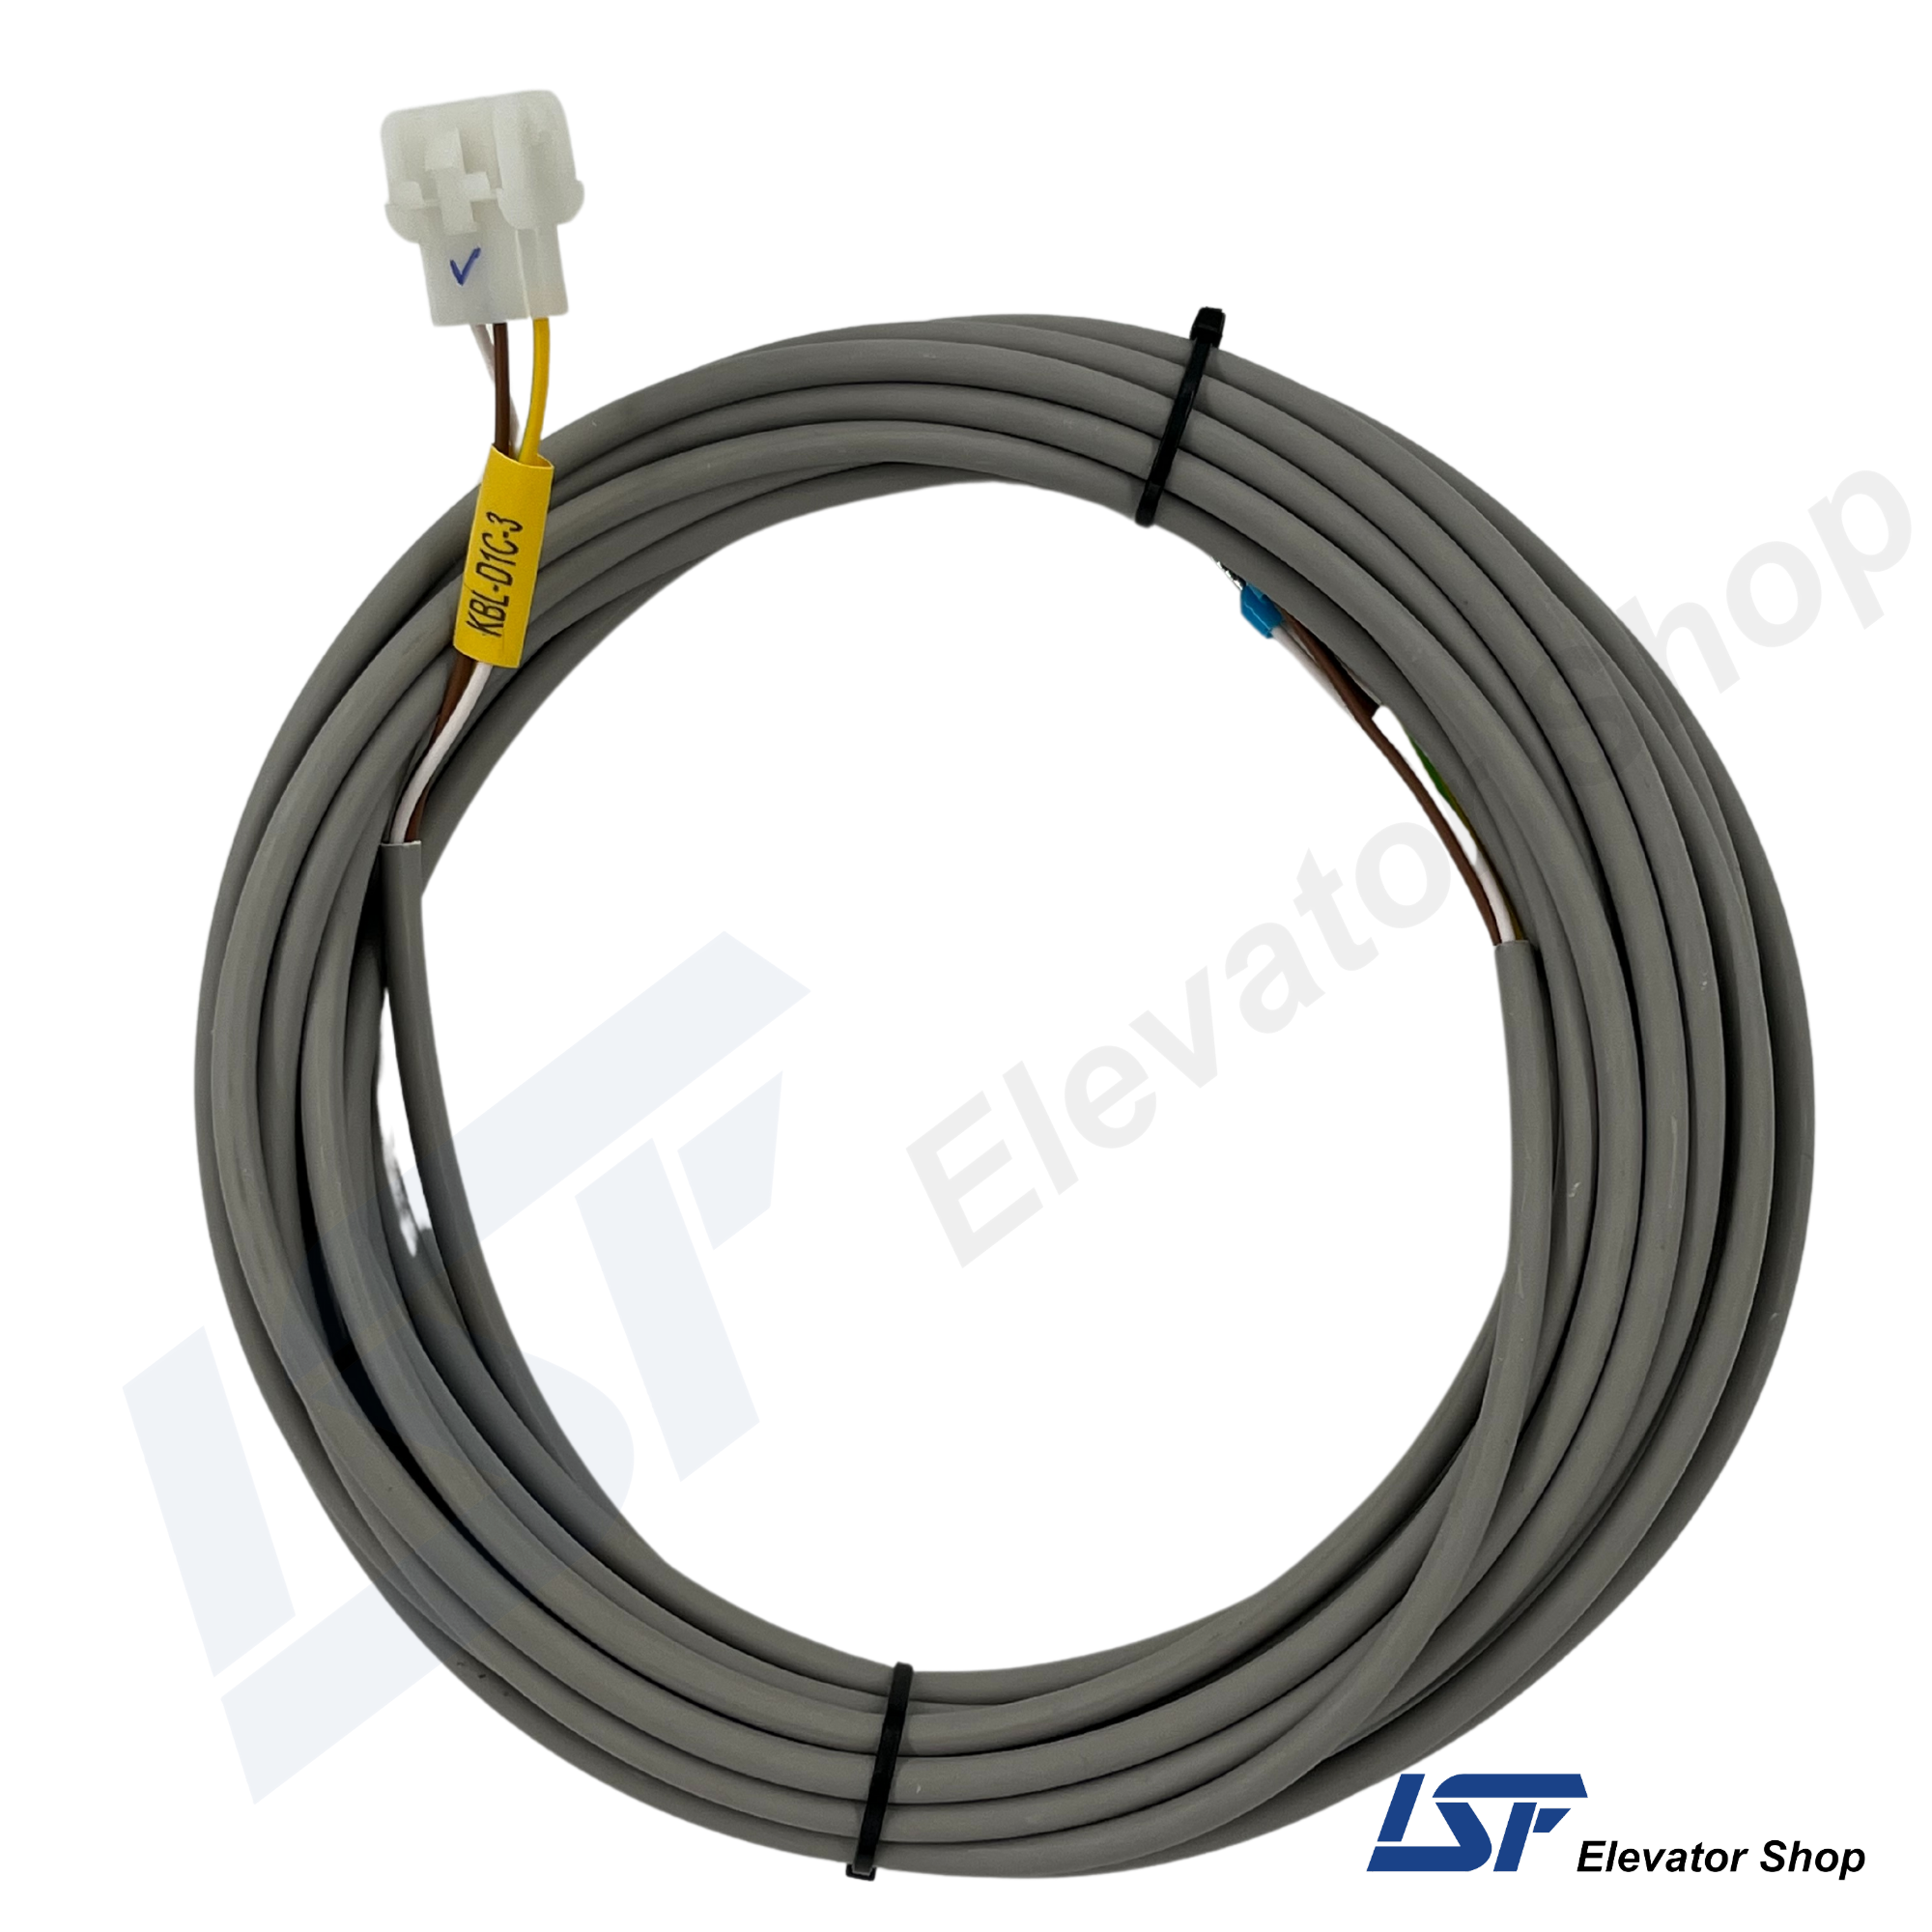 KBL-D1C-3 Arkel Door Contacts Cable 10m. for Elevator Systems